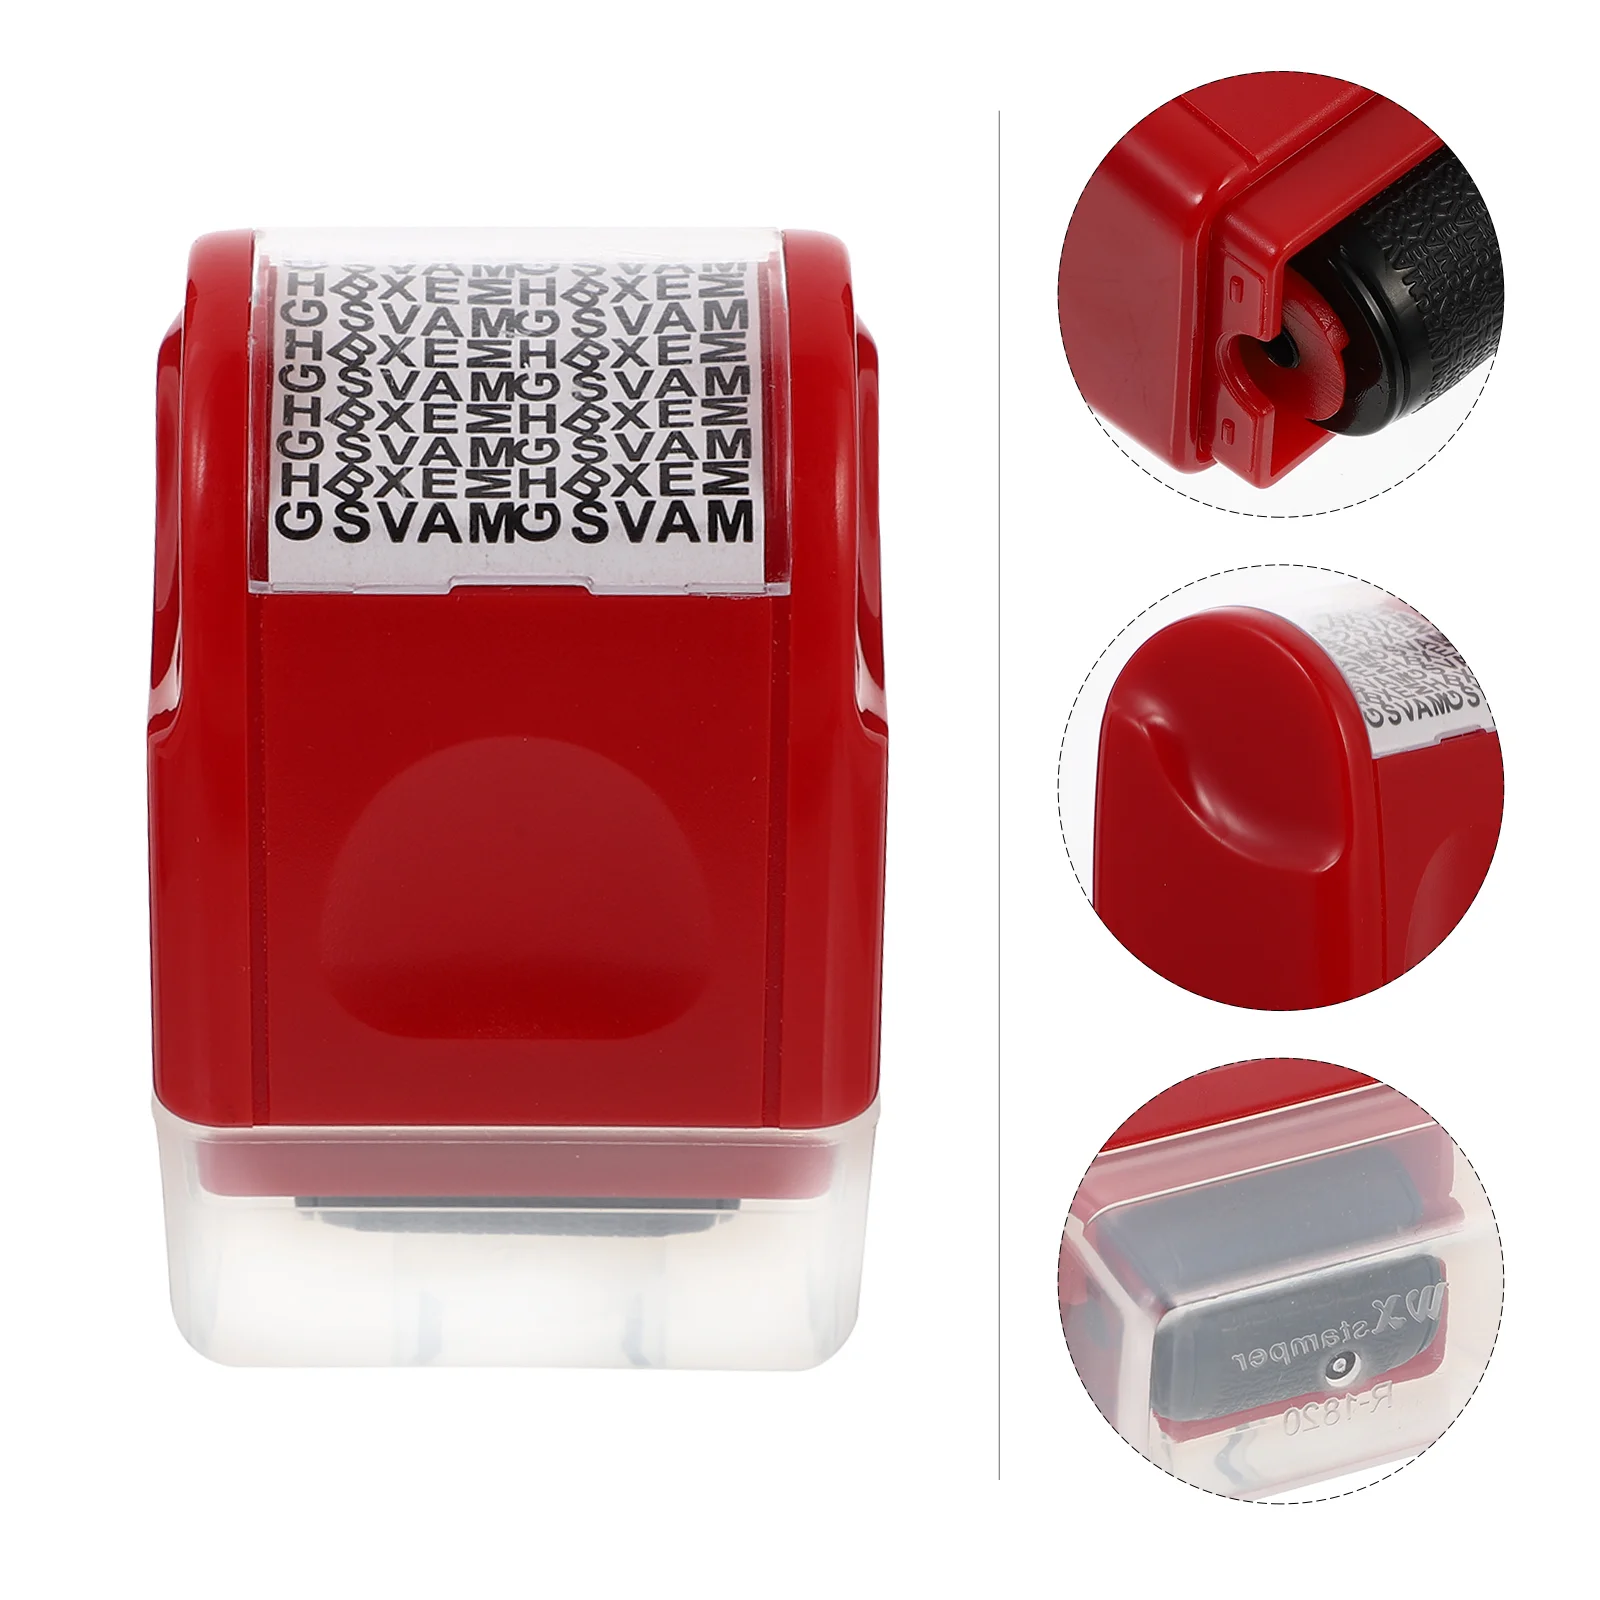 

Confidentiality Seal The Name Stamp Personal Private Security Anti-stress Plastic